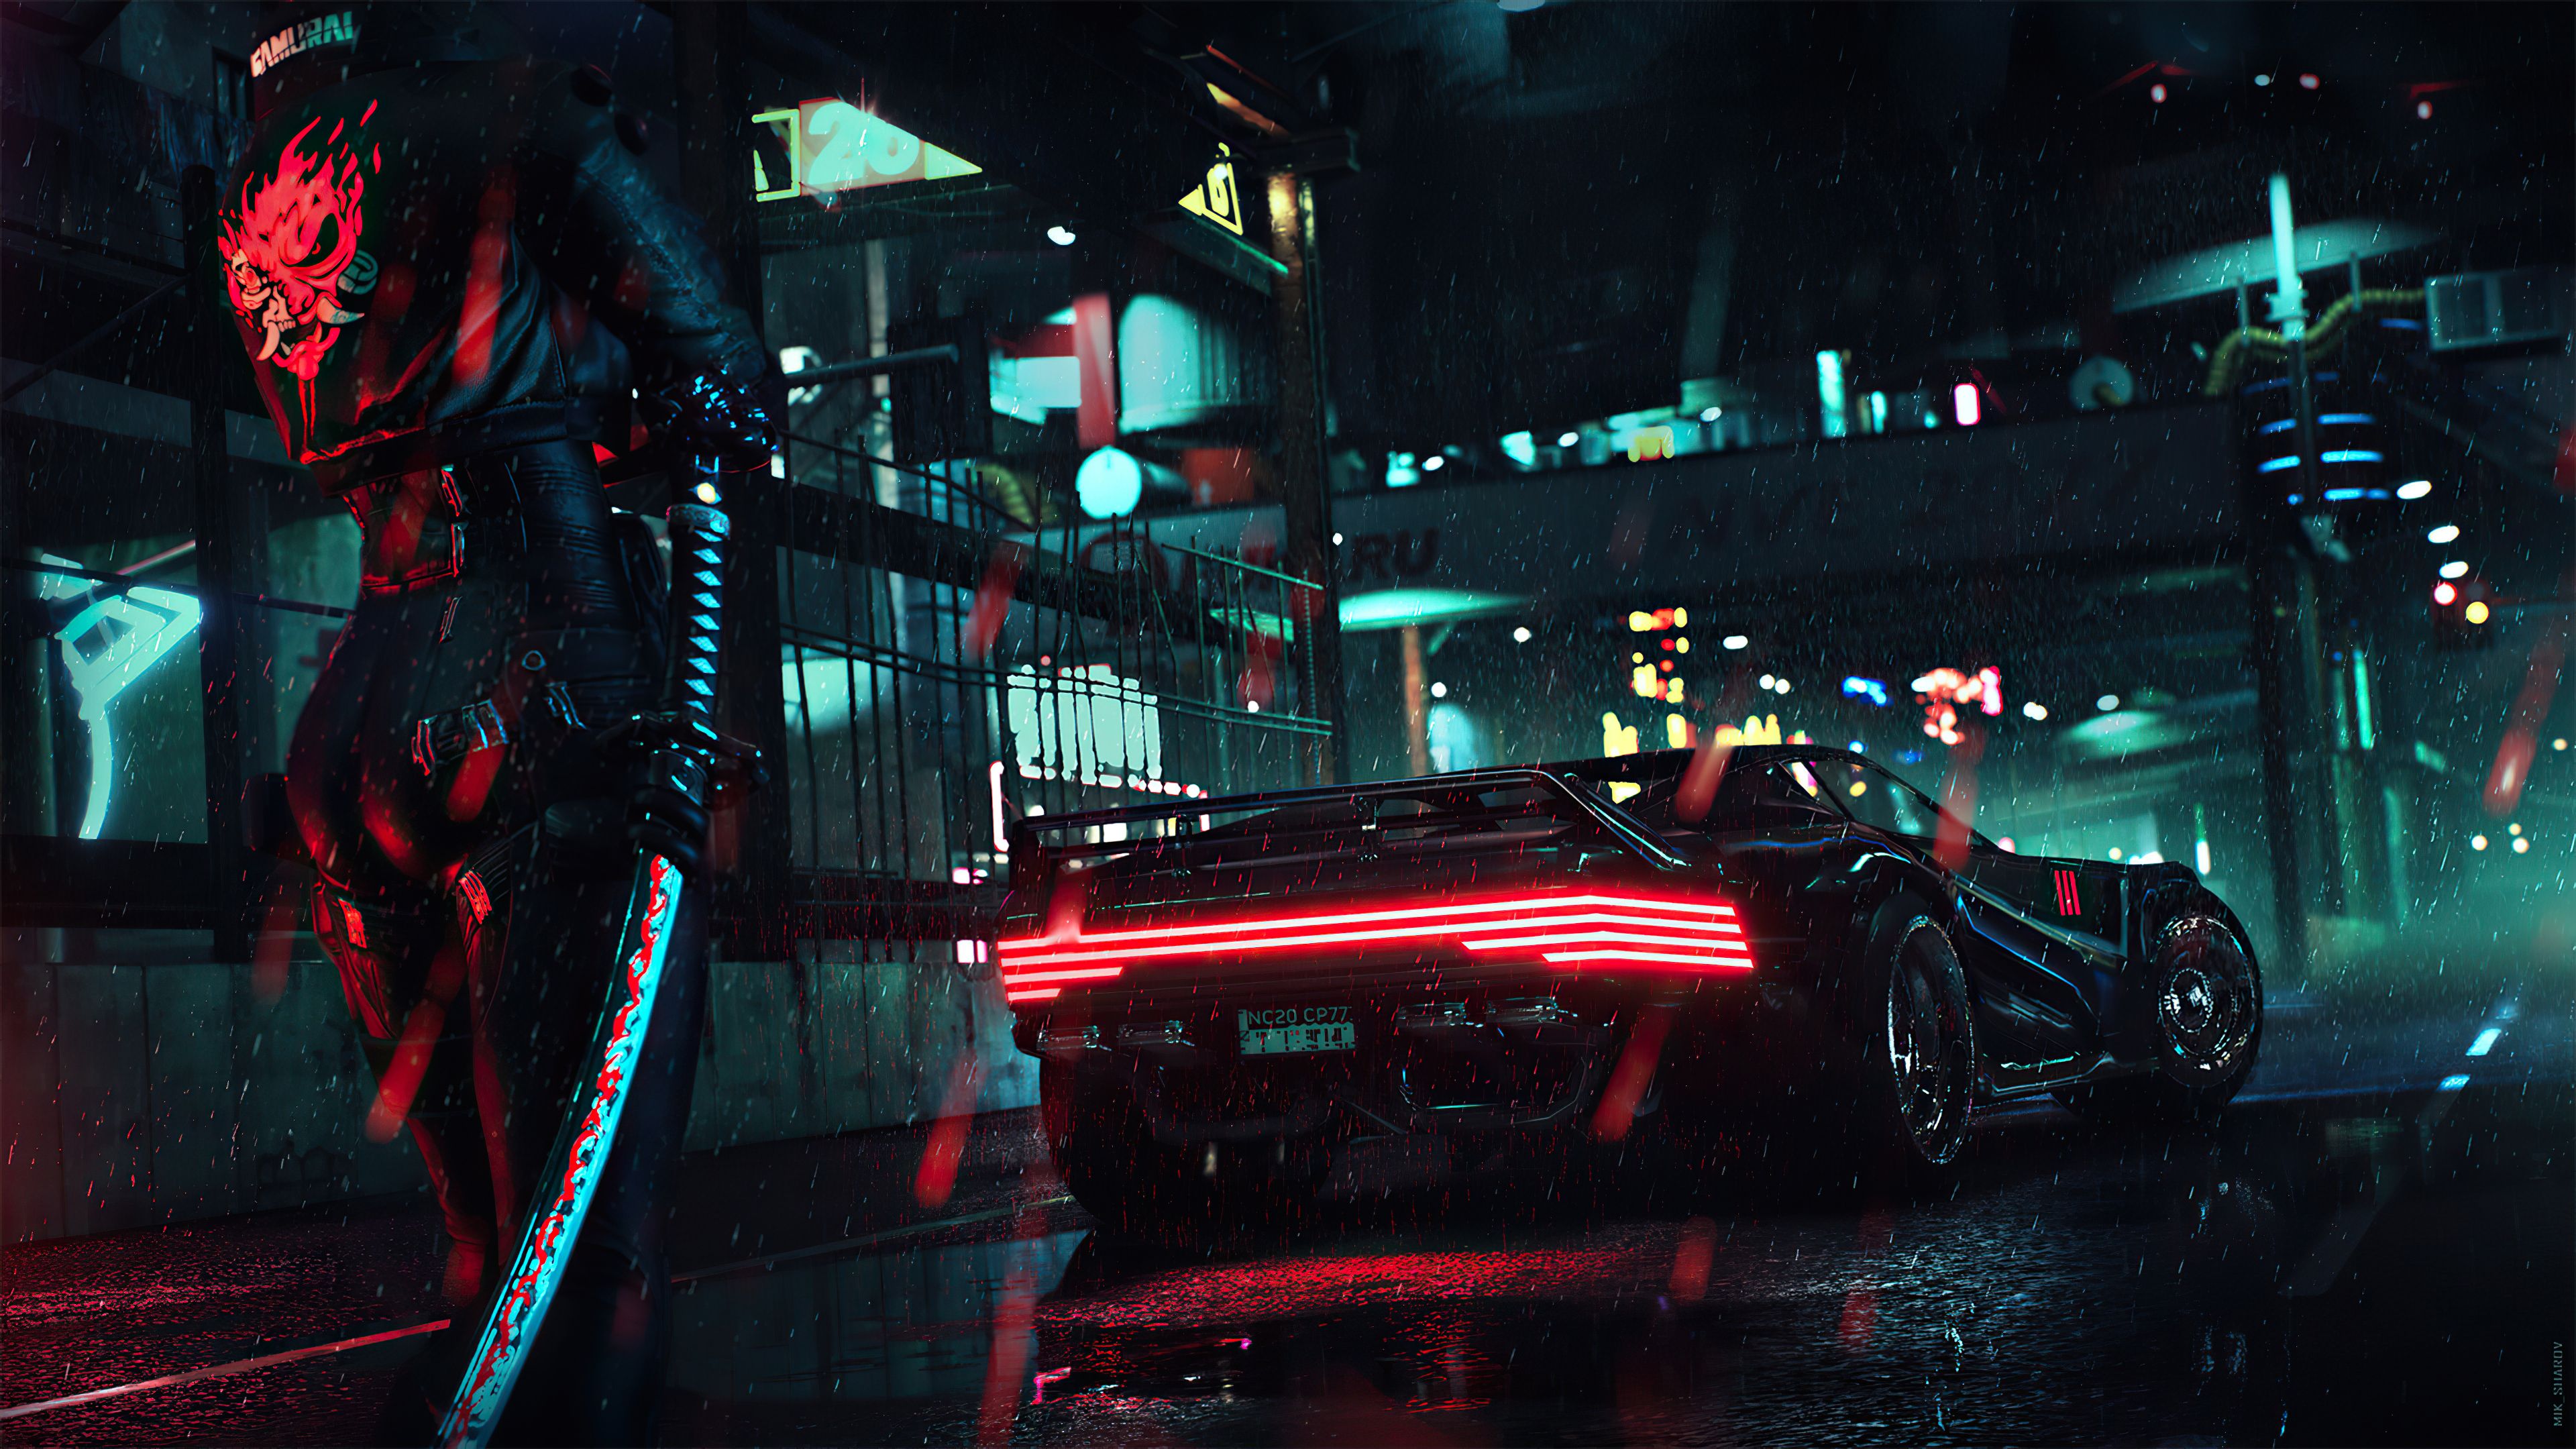 2932x2932 4k Cyberpunk 2077 Ps Game Ipad Pro Retina Display HD 4k Wallpapers, Image, Backgrounds, Photos and Pictures